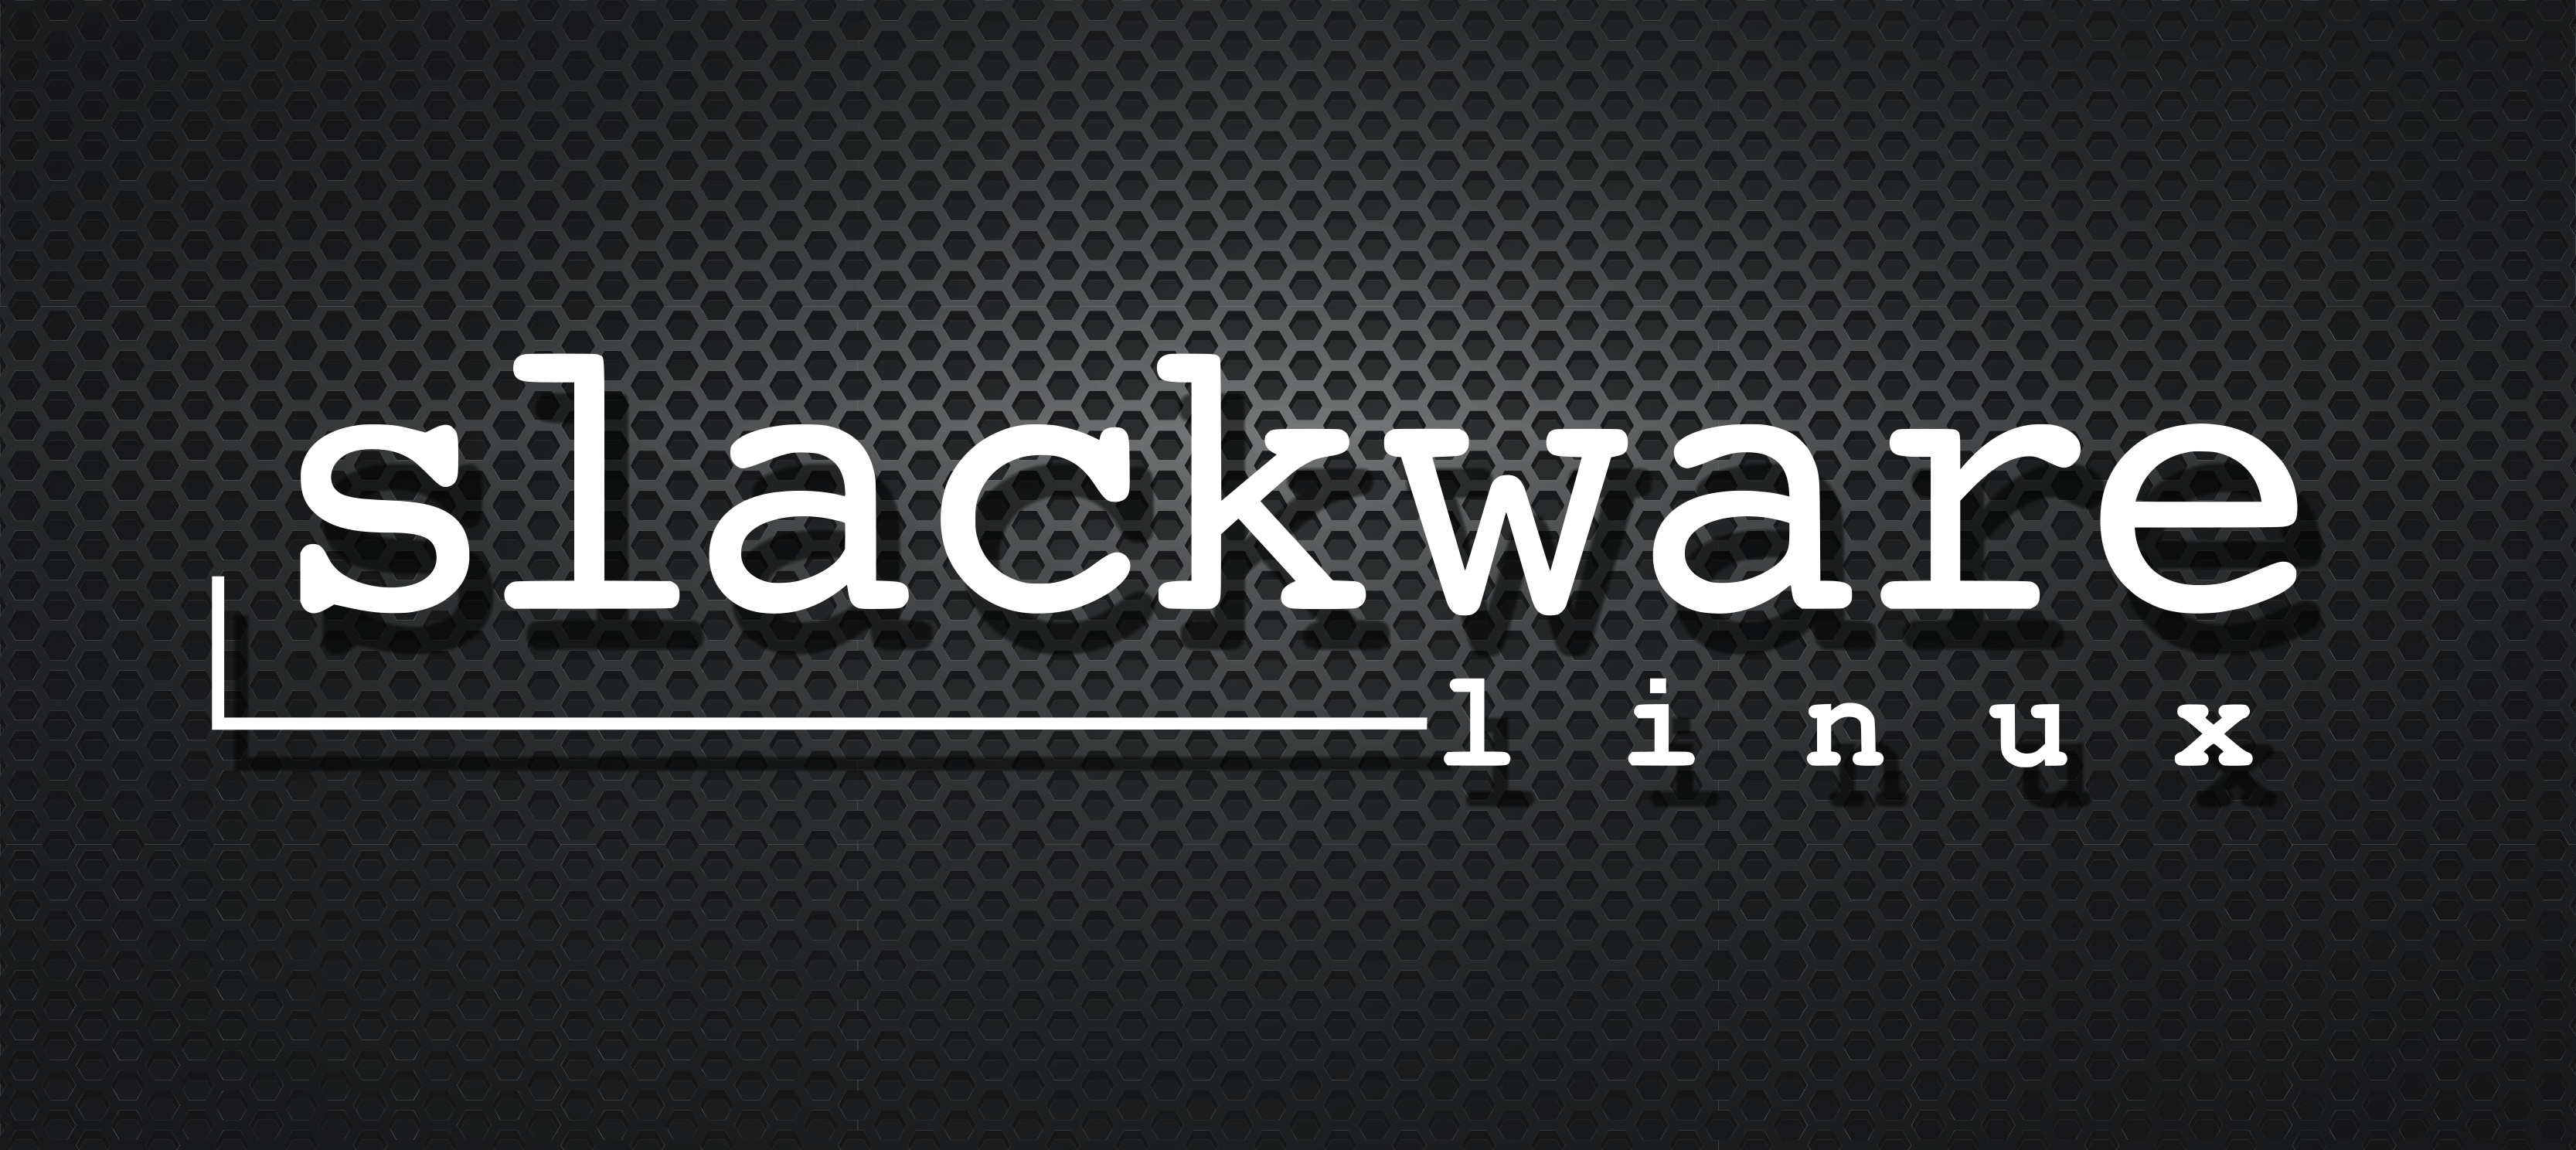 Hackaday            Making The Case For Slackware In 2018Post navigationComment navigationComment navigationSearchNever miss a hackSubscribeIf you missed itOur ColumnsSearchNever miss a hackSubscribeIf you missed itCategoriesOur ColumnsRecent commentsNow on Hackaday.ioNever miss a hackSubscribe to Newsletter